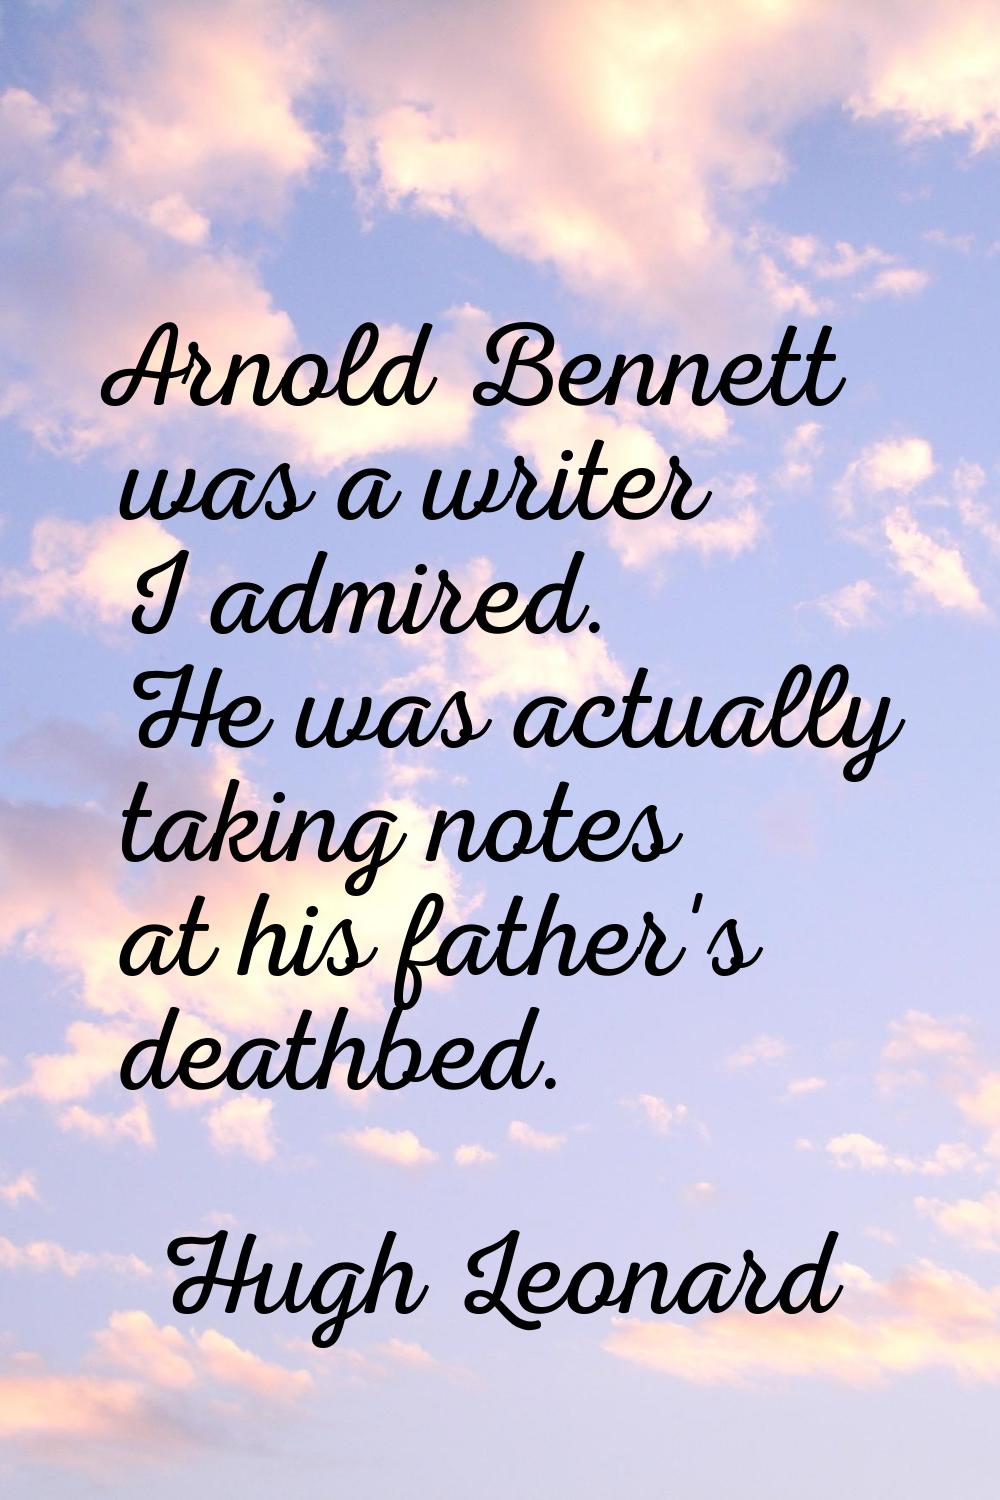 Arnold Bennett was a writer I admired. He was actually taking notes at his father's deathbed.